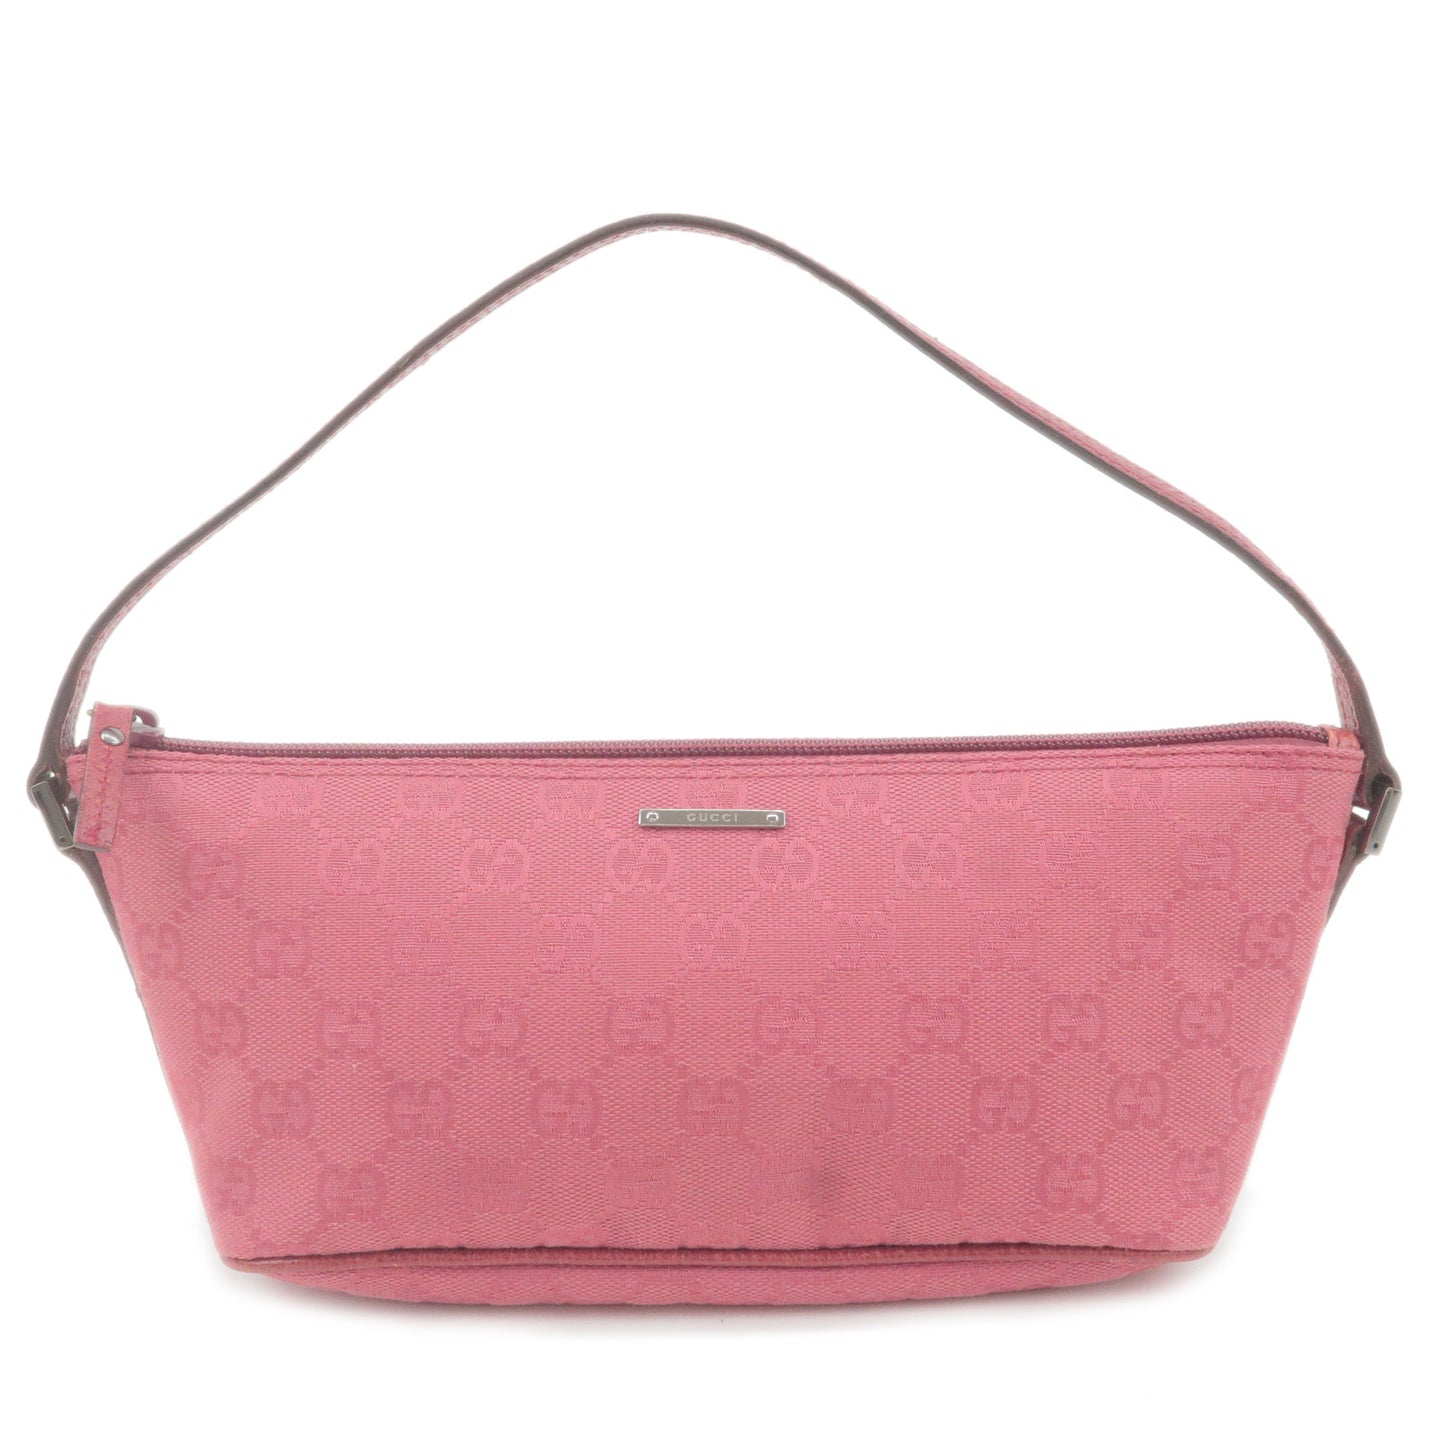 GUCCI-GG-Canvas-Leather-Boat-Bag-Hand-Bag-Pink-07198